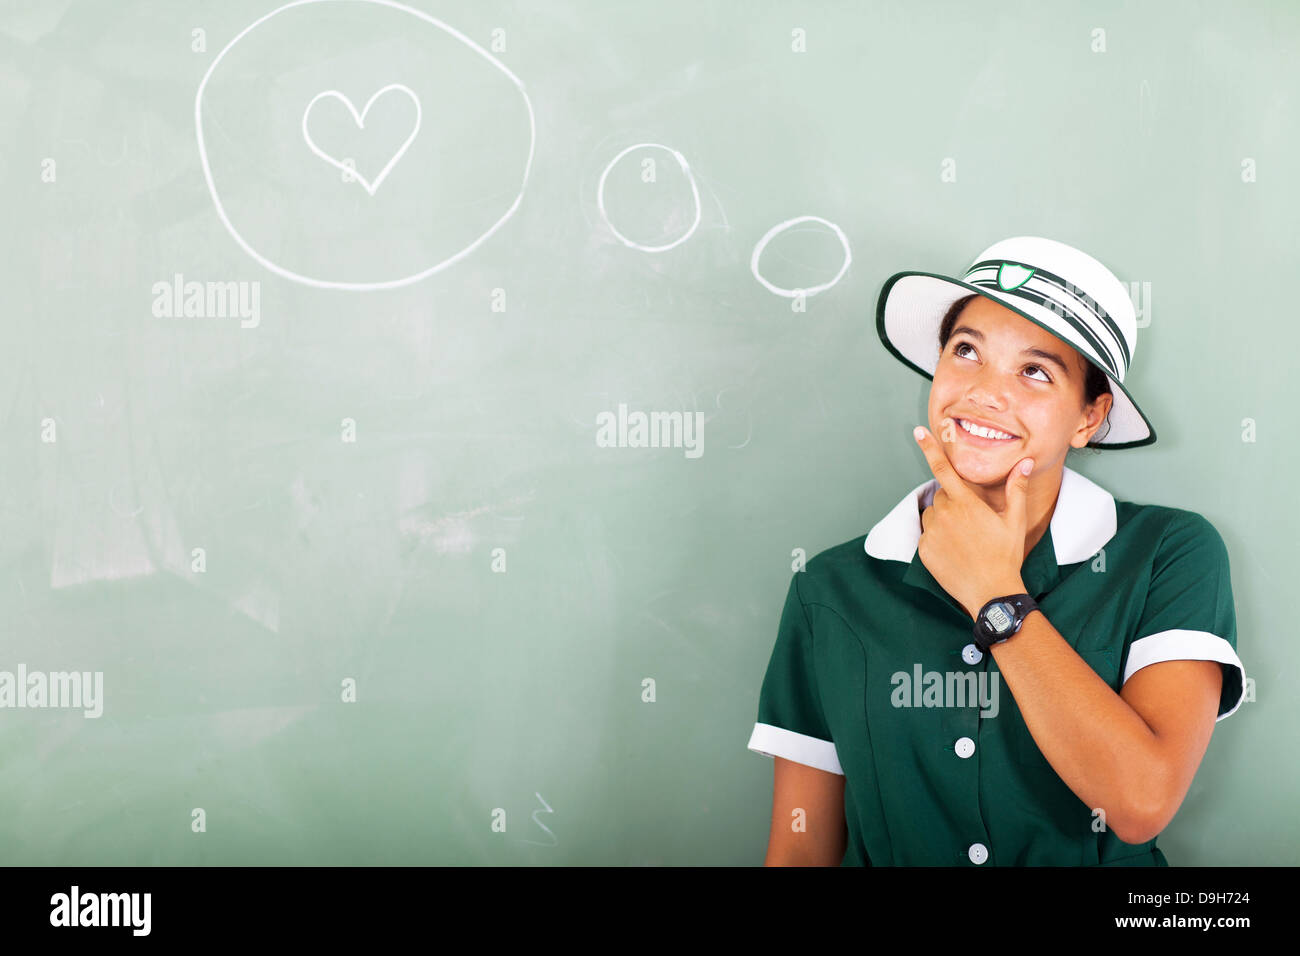 cute high school girl thinking about love in classroom Stock Photo